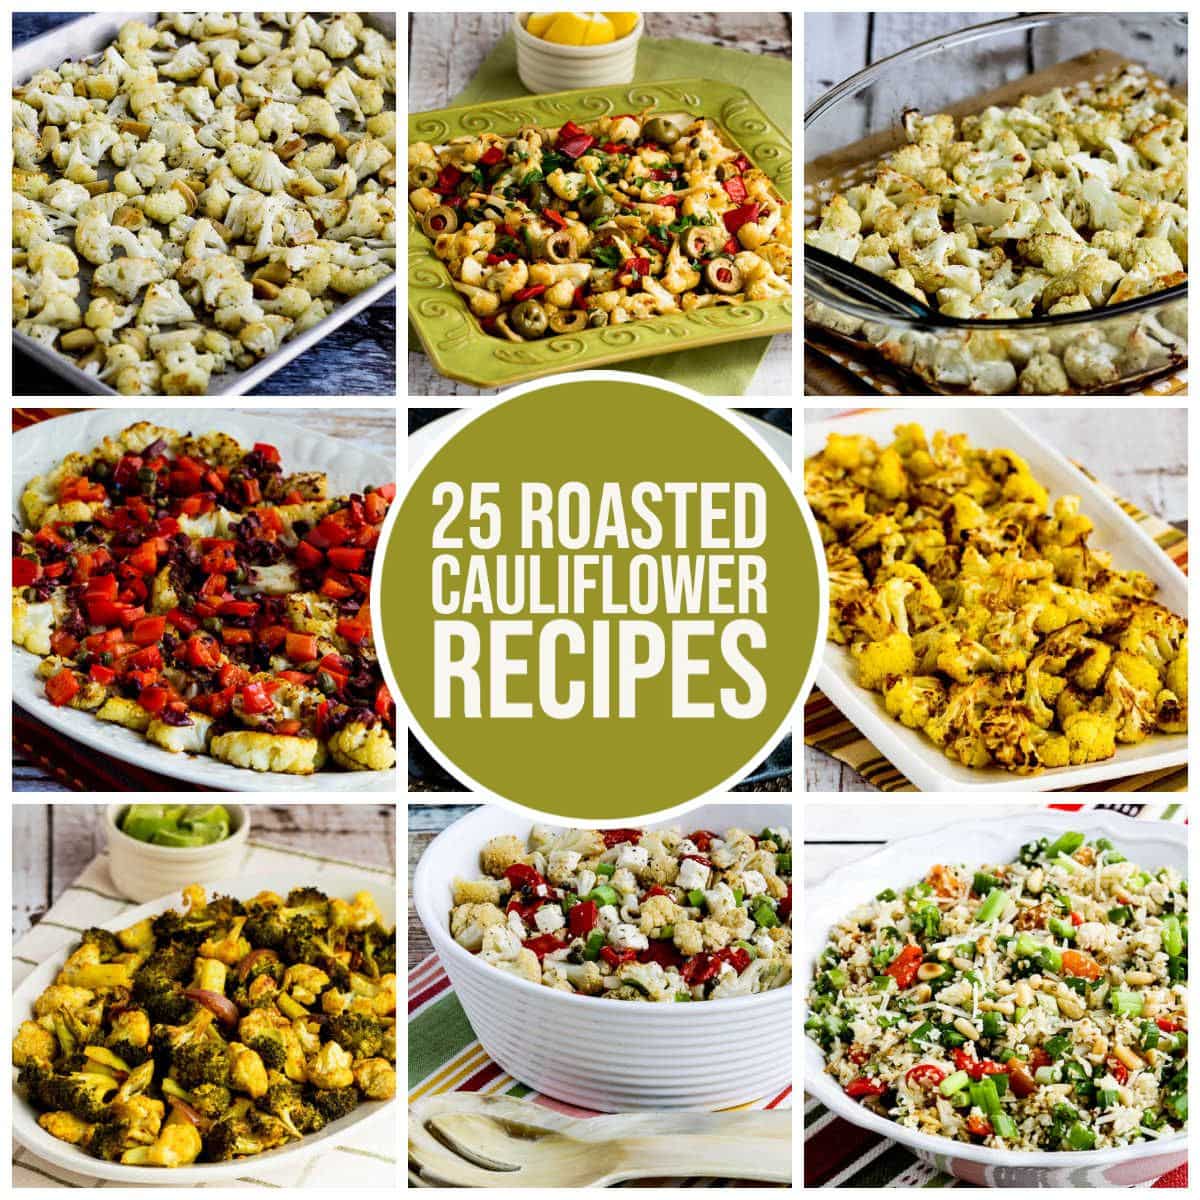 25 Roasted Cauliflower Recipes Collage of featured recipes with text overlays